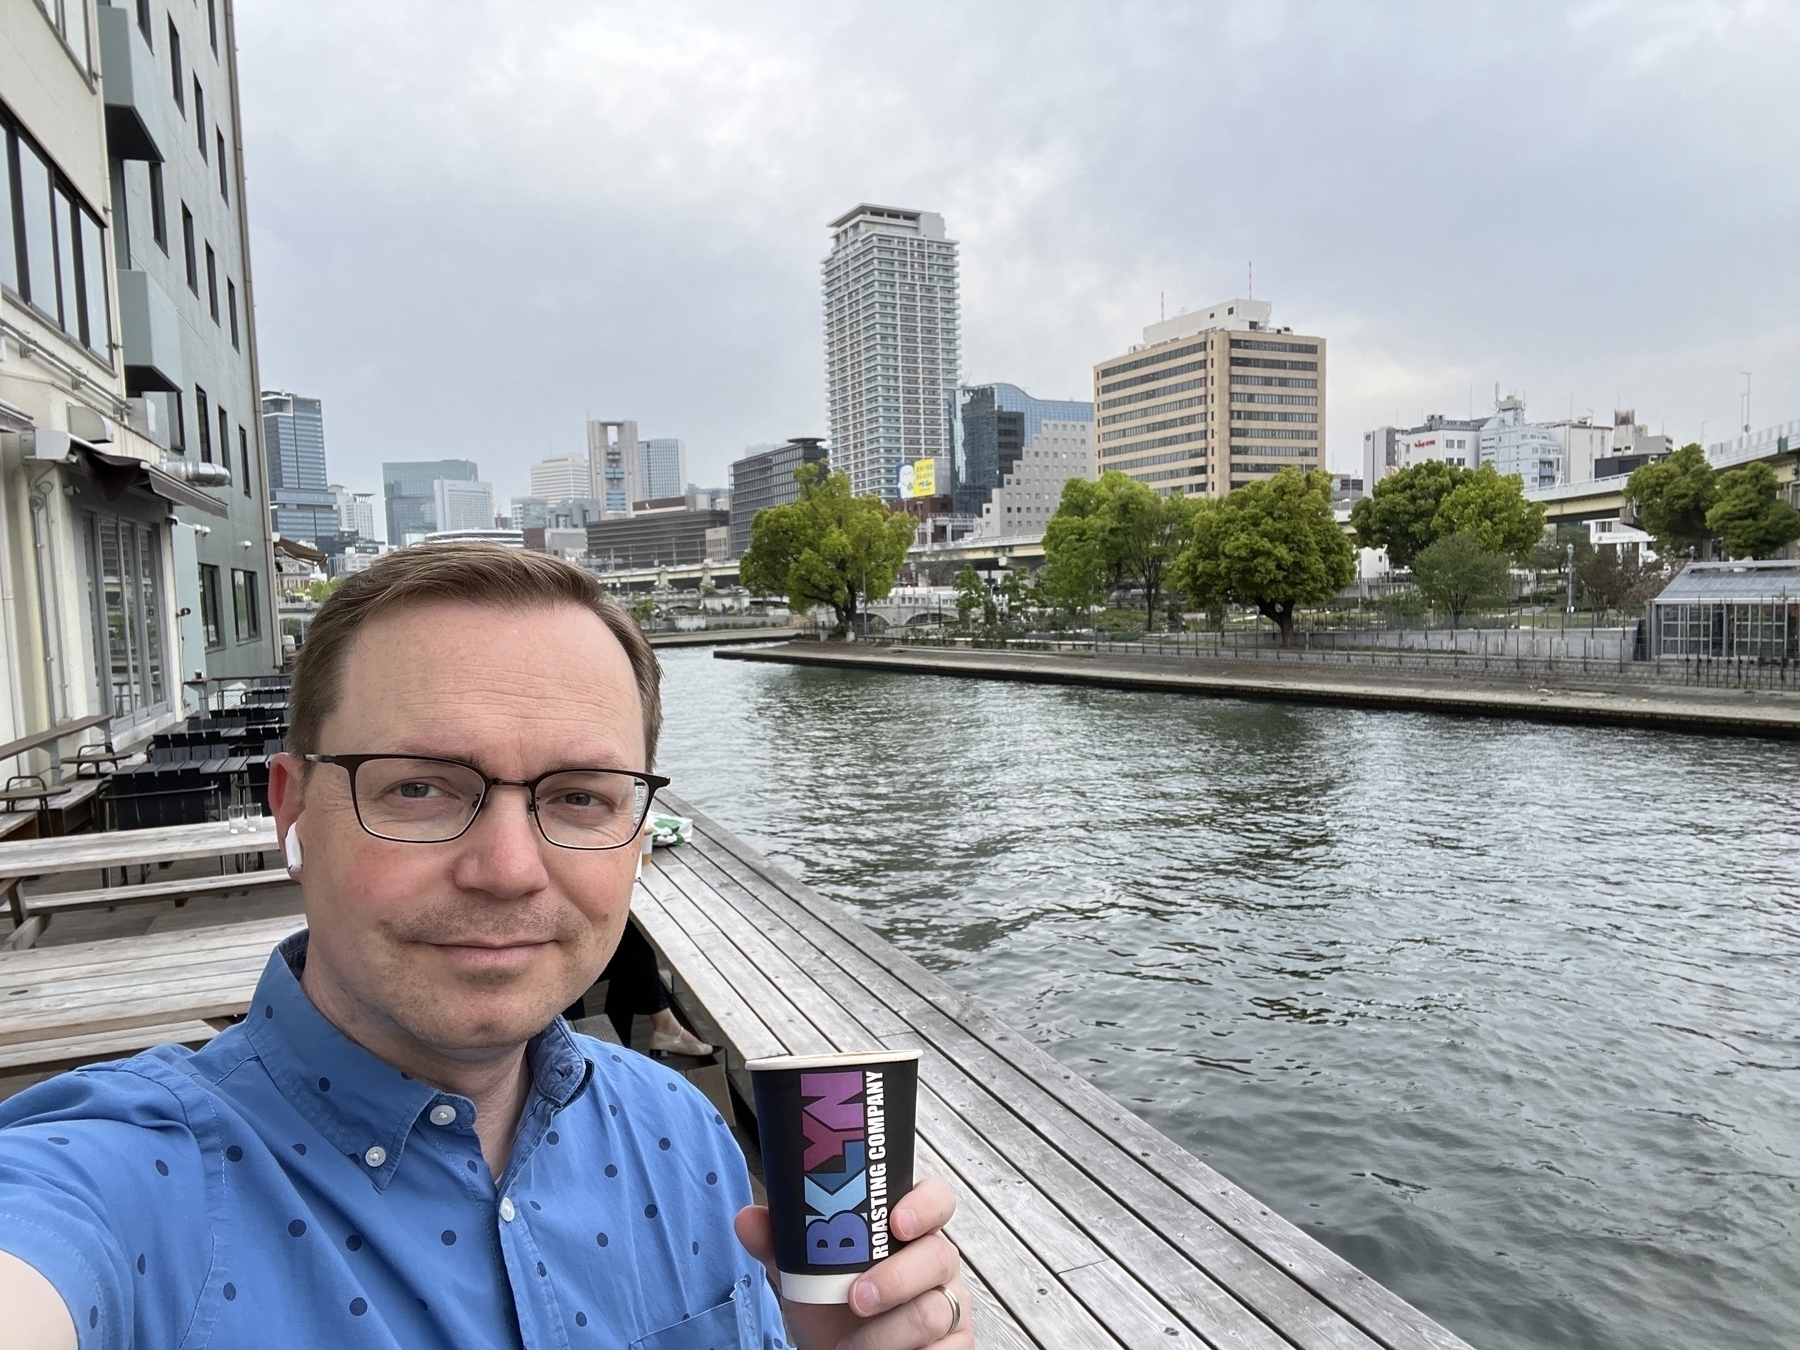 Chad stands on a riverside patio holding a Brooklyn Roasters coffee cup